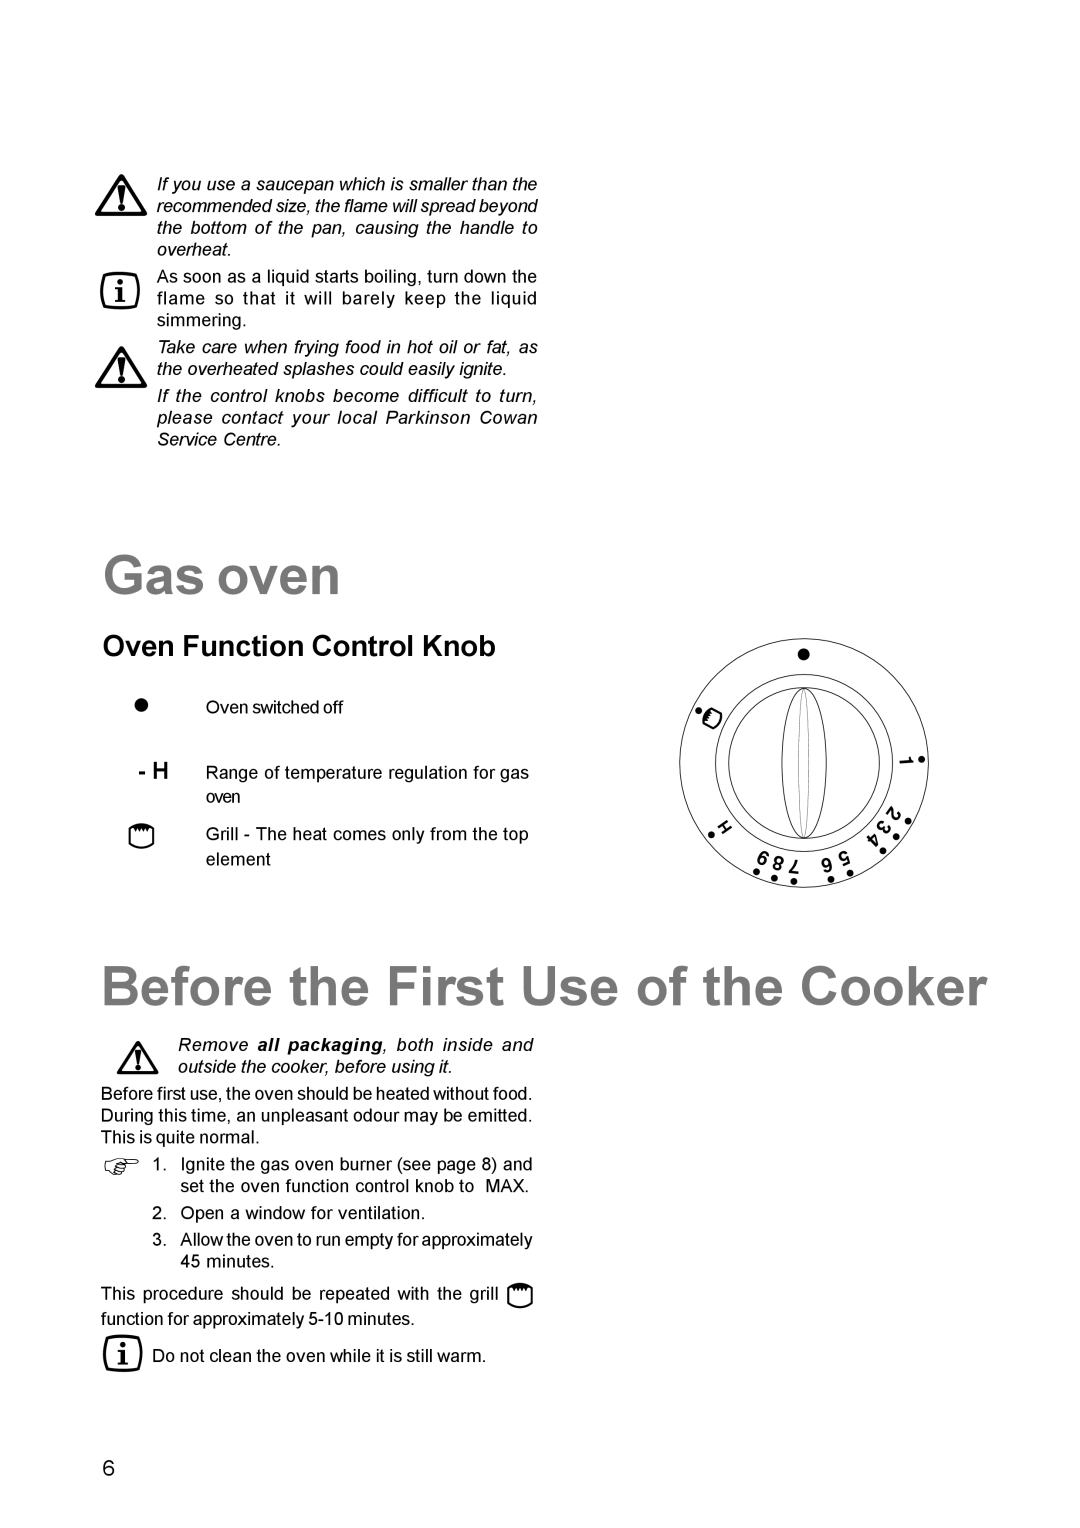 Electrolux SIG 224 G manual Gas oven, Before the First Use of the Cooker, Oven Function Control Knob 